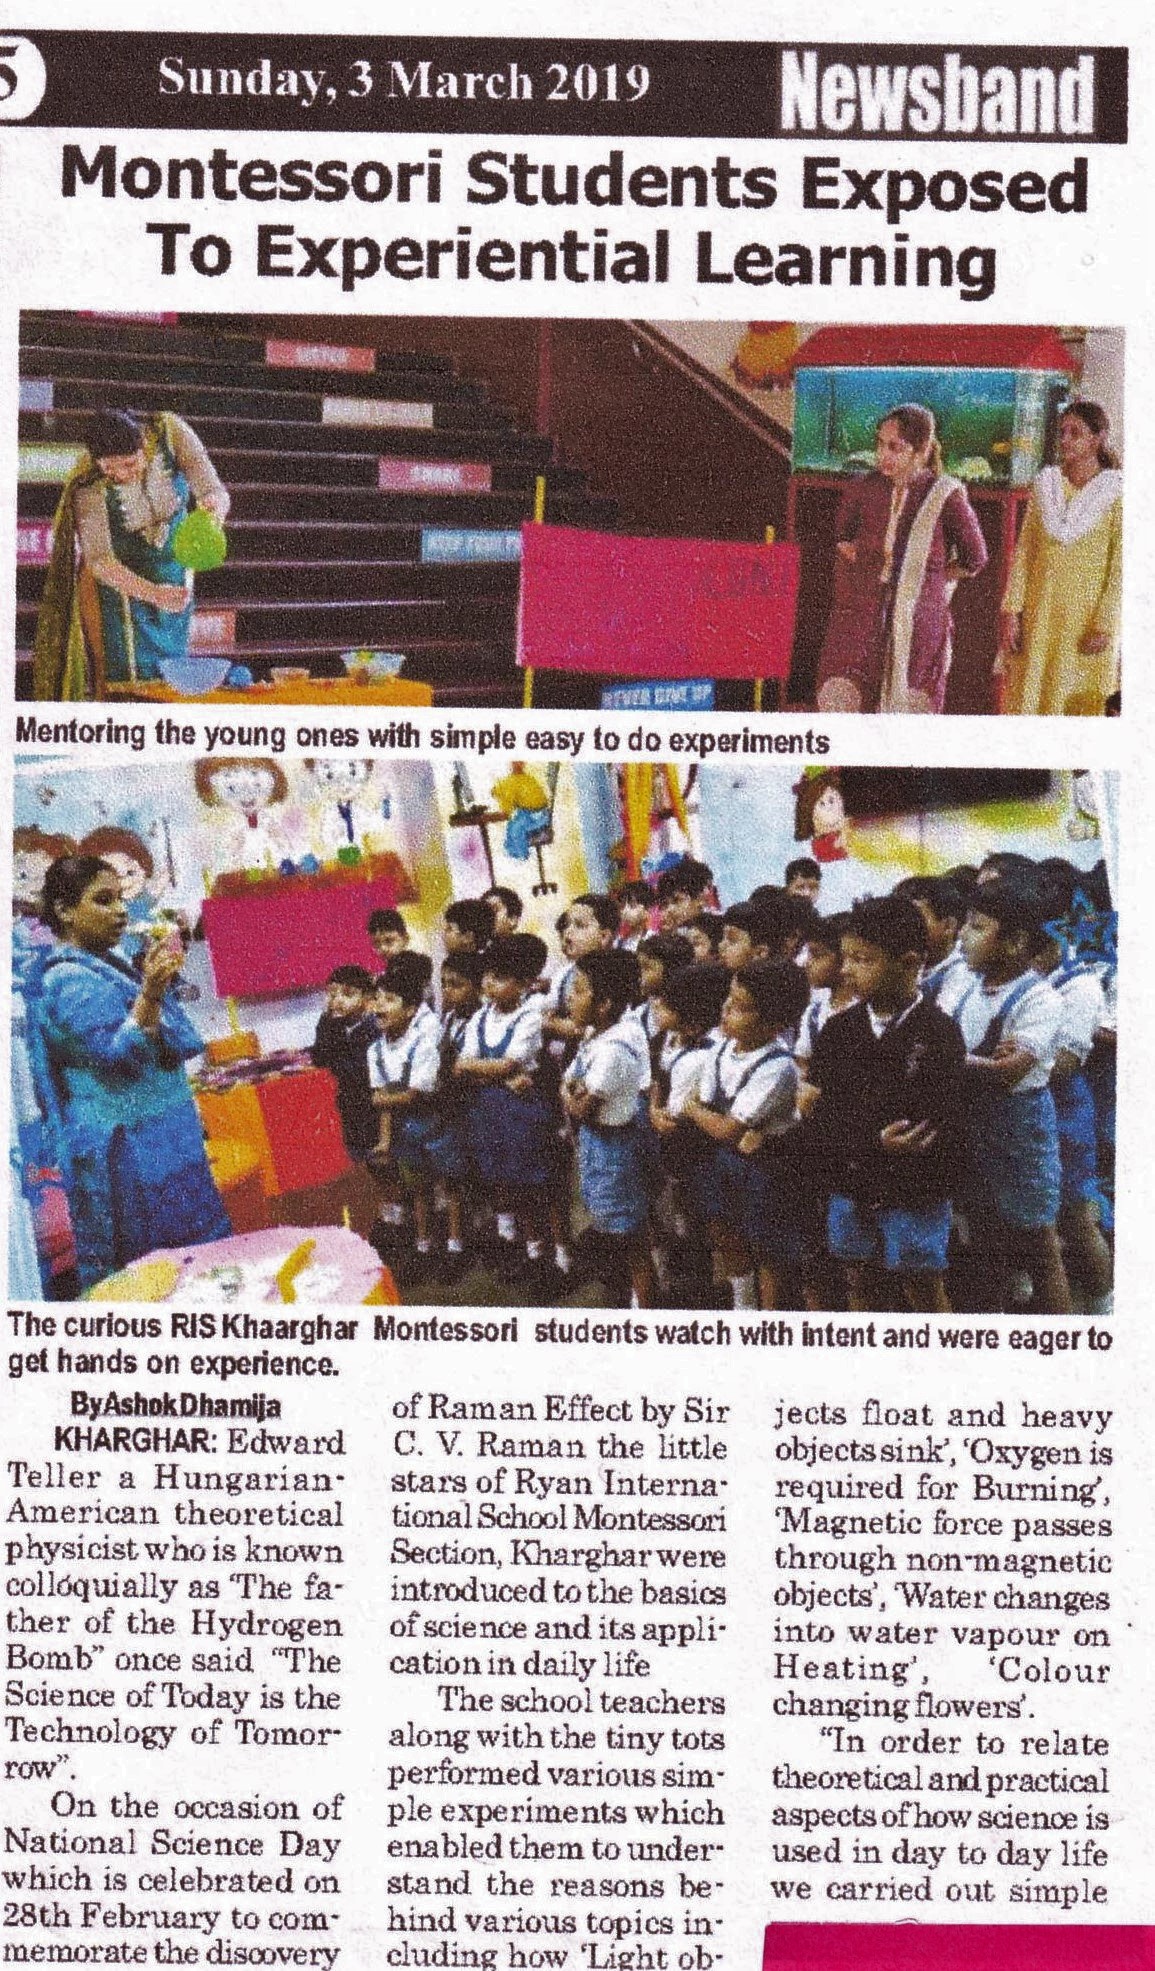 Montessori students exposed to experiential learning were mentioned in Newsband - Ryan International School, Kharghar